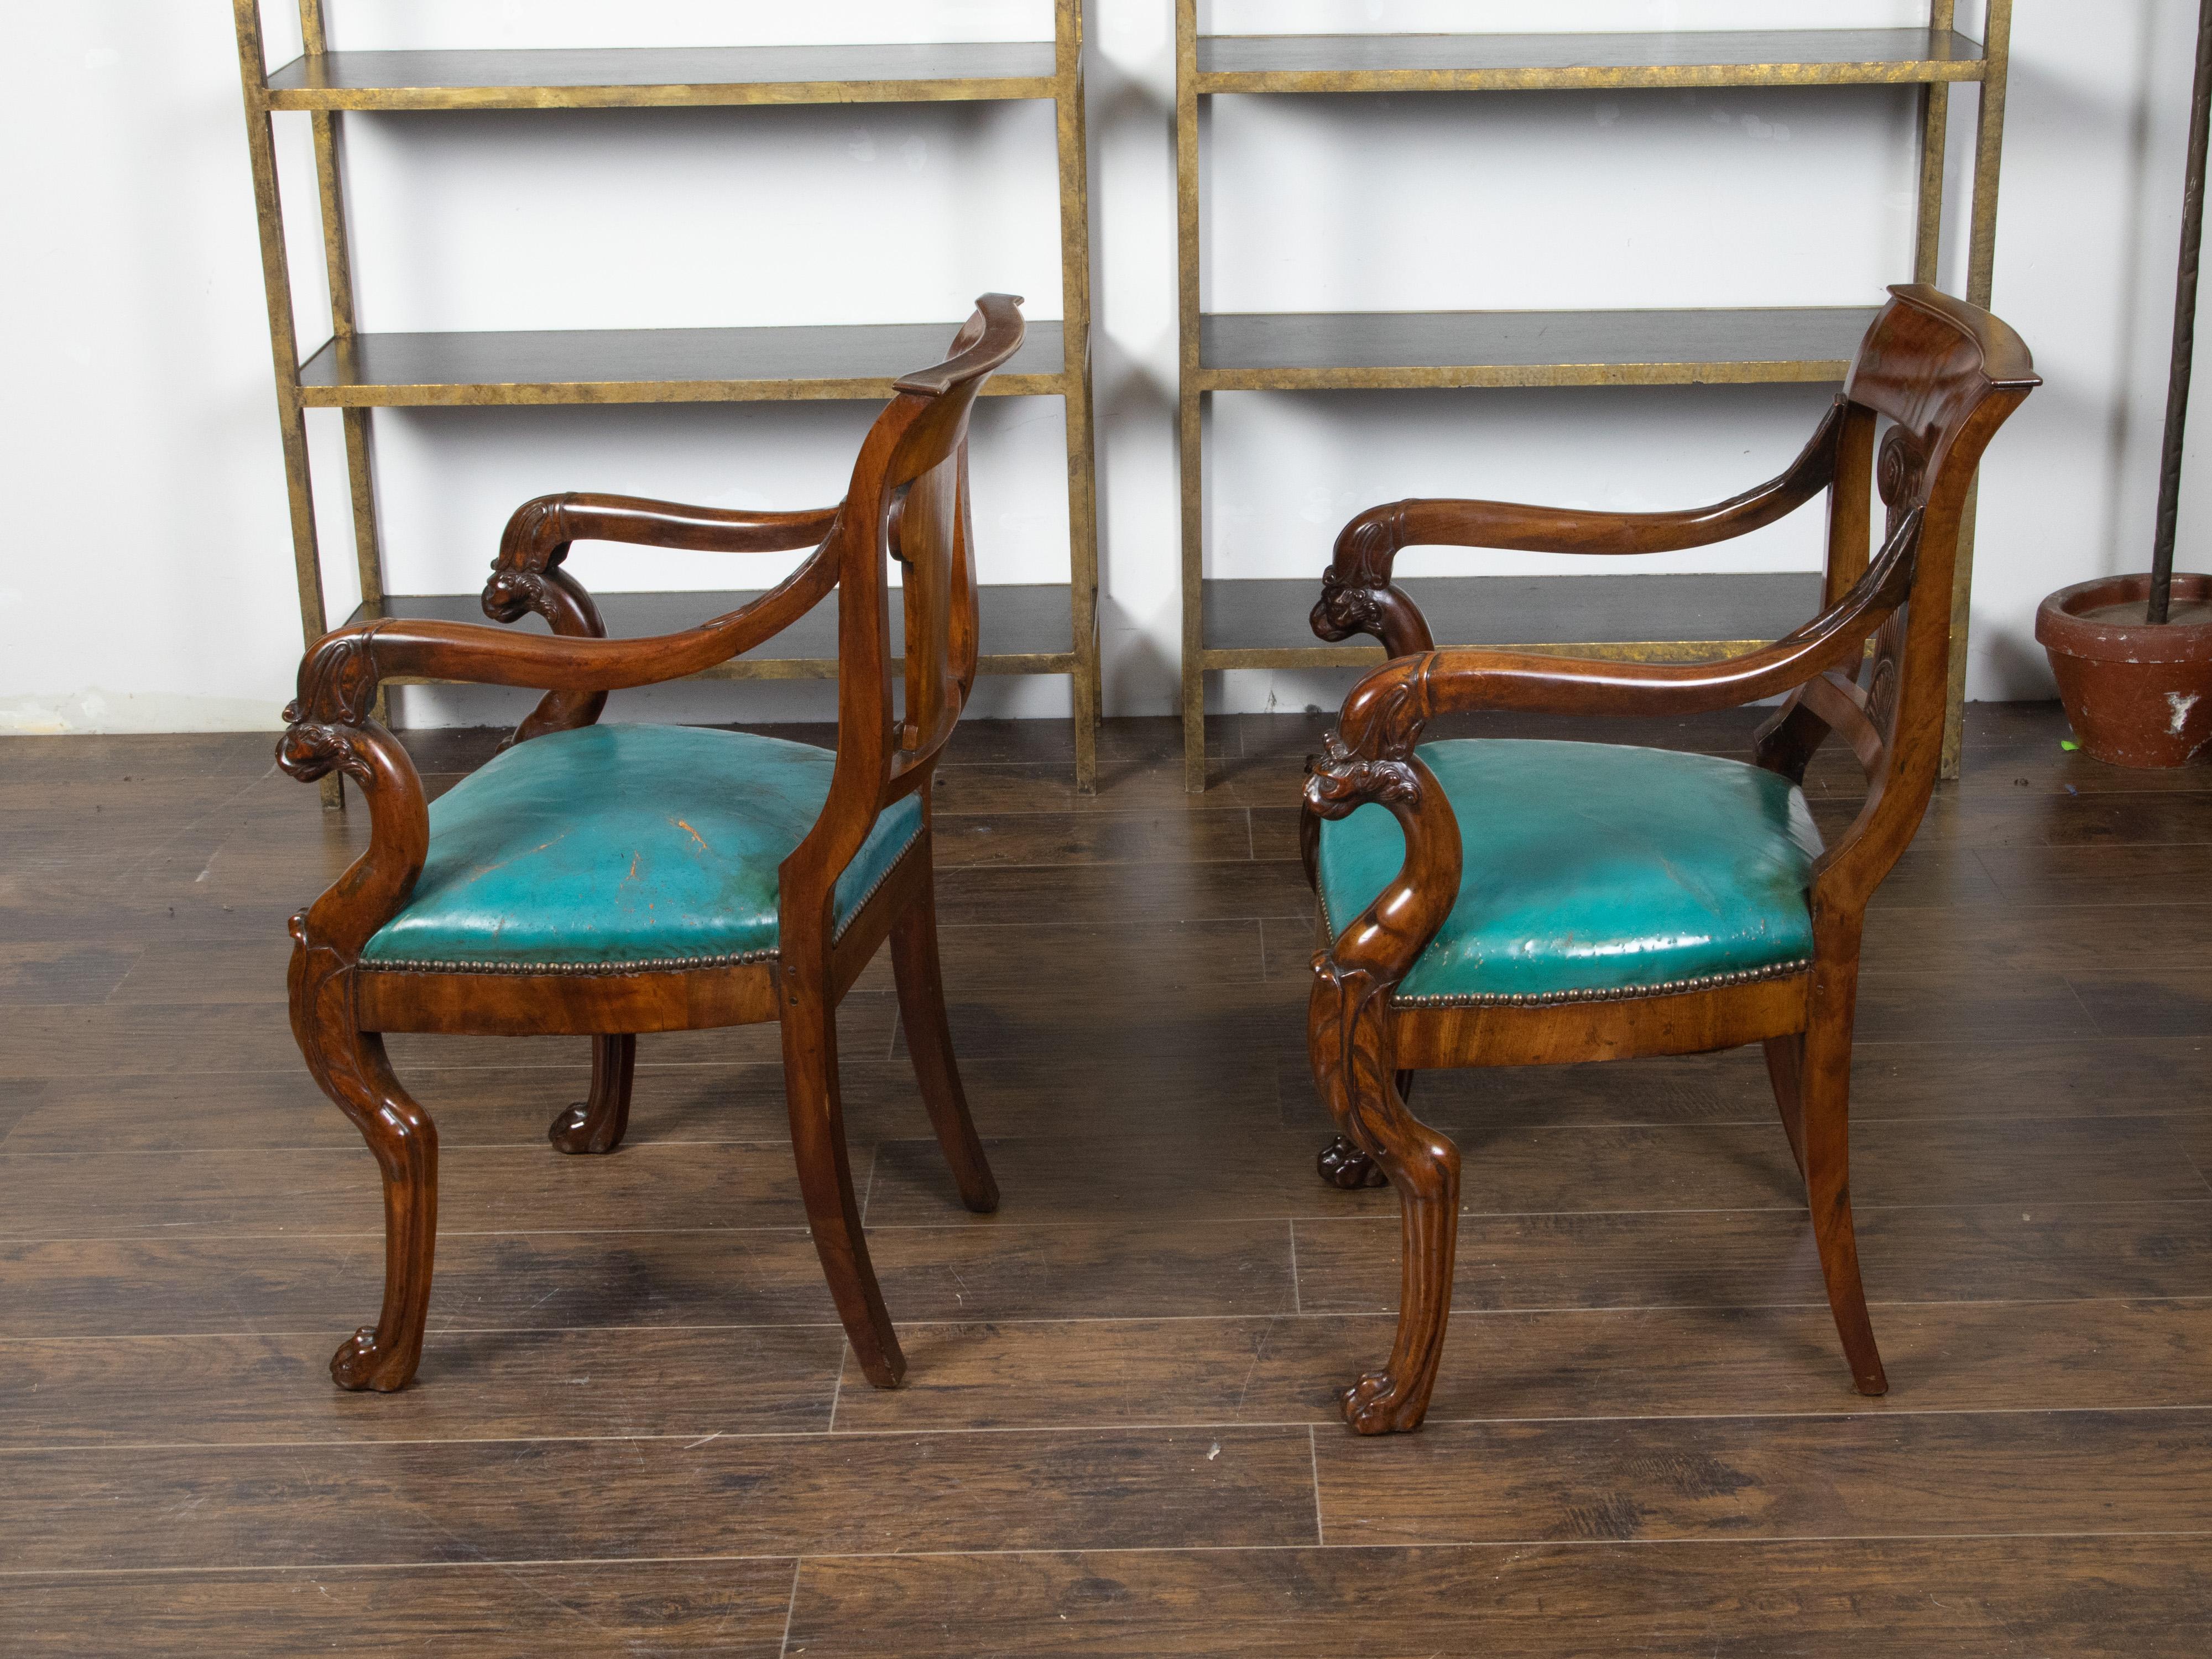 Pair of English Regency 1840s Mahogany Chairs with Ionic Capitals and Griffons For Sale 3